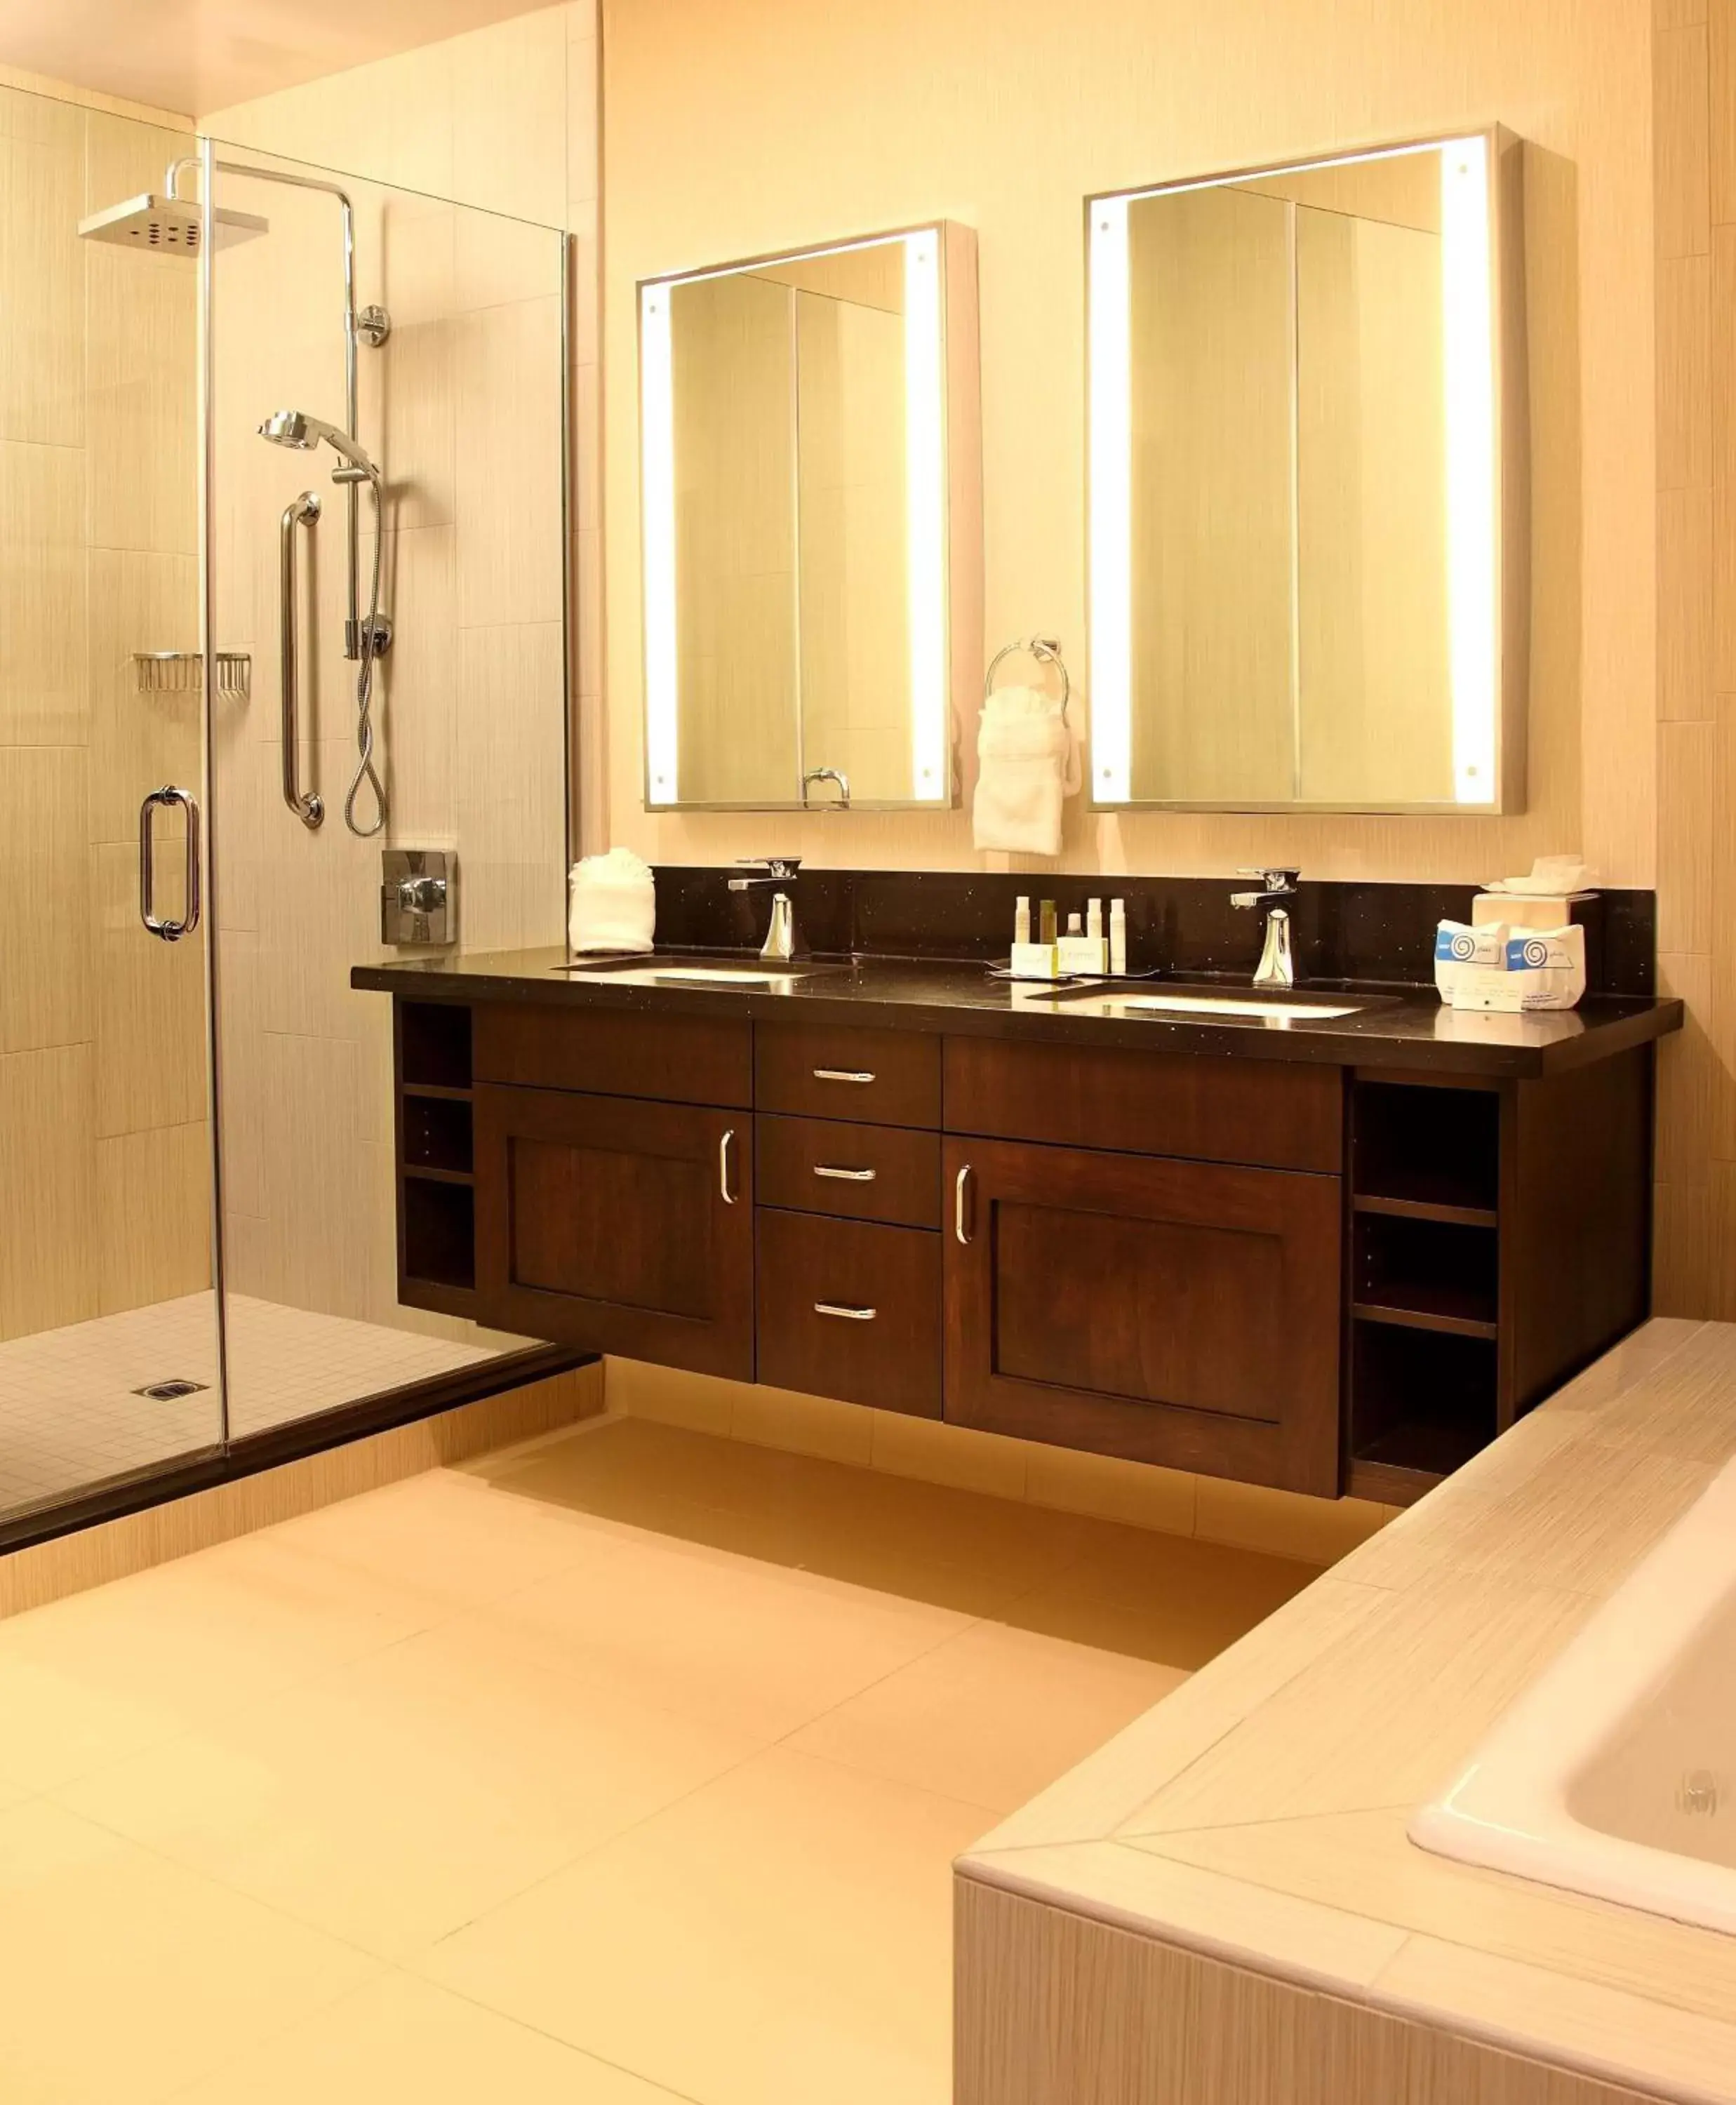 Bathroom in DoubleTree by Hilton Claremont